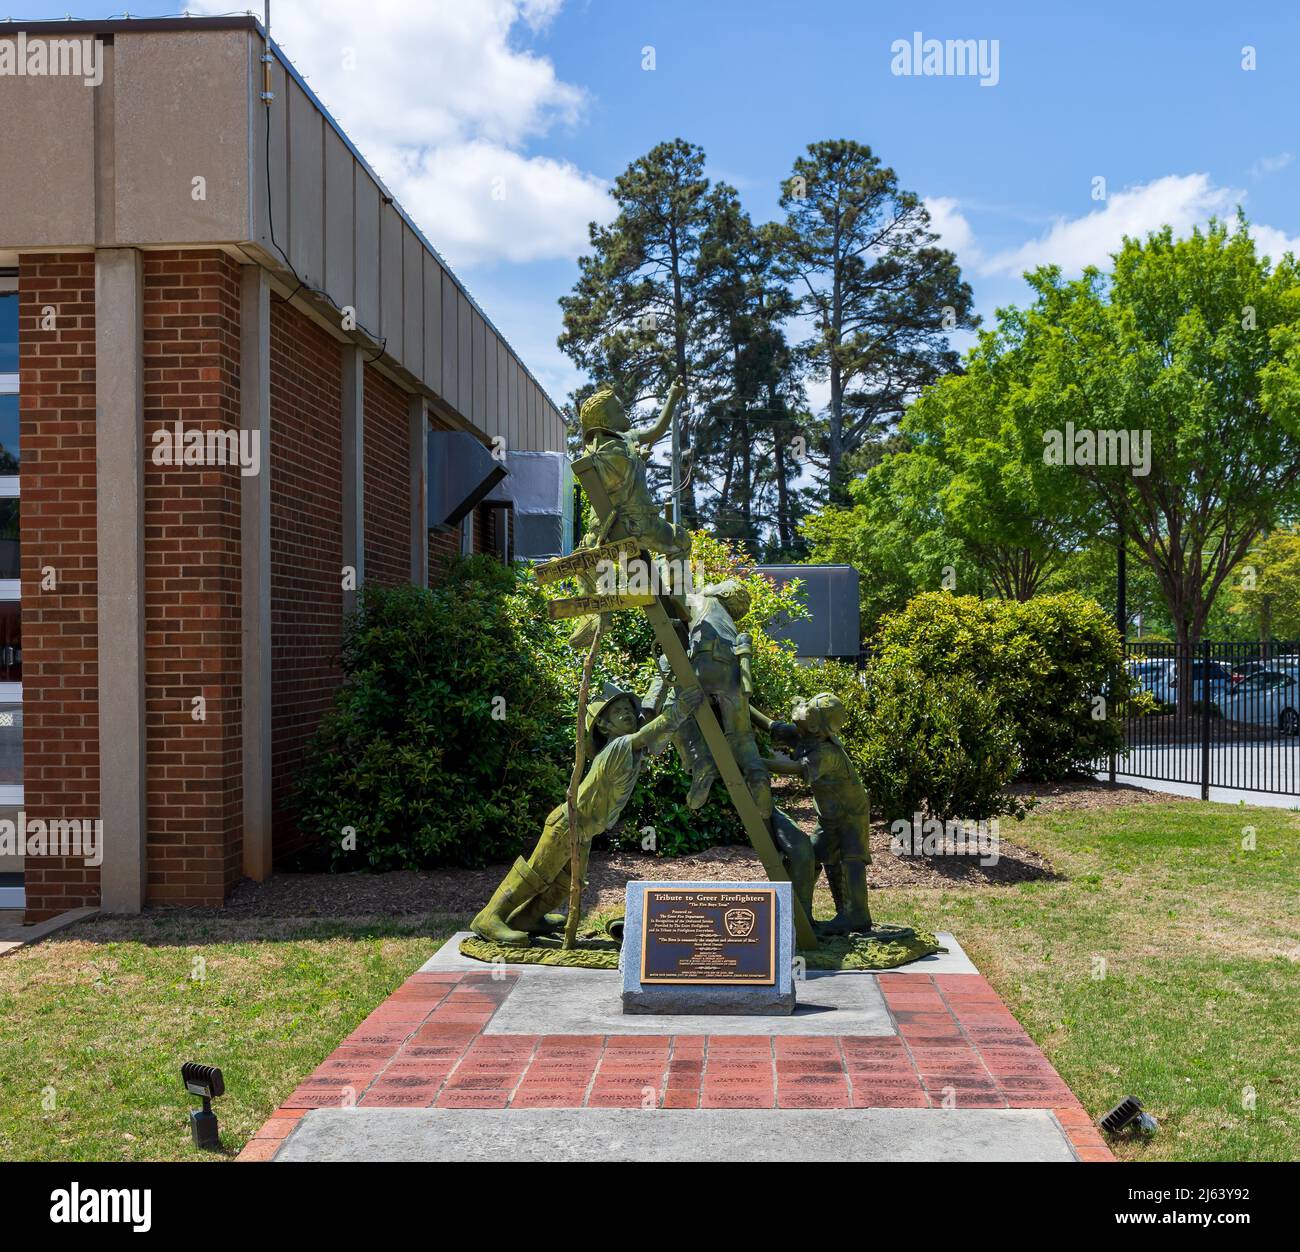 GREER, SC, USA 24 APRIL 2022: Fire Department tribute plaque and sculpture for all firefighters. Square image. Stock Photo